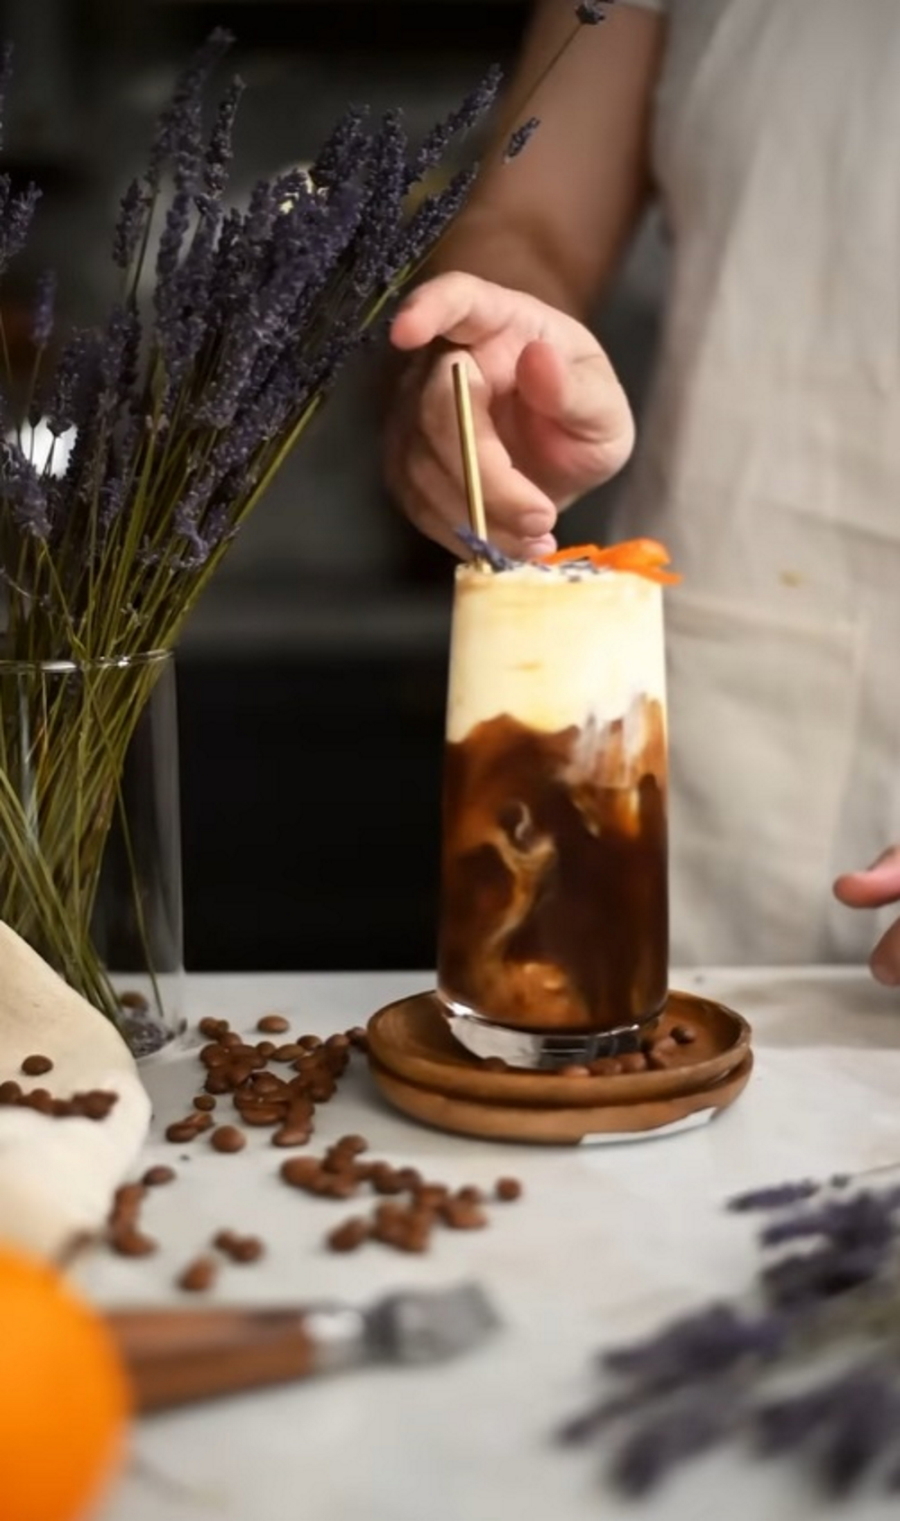 UAE foodies get creative with European cream as part of iced coffee challenge